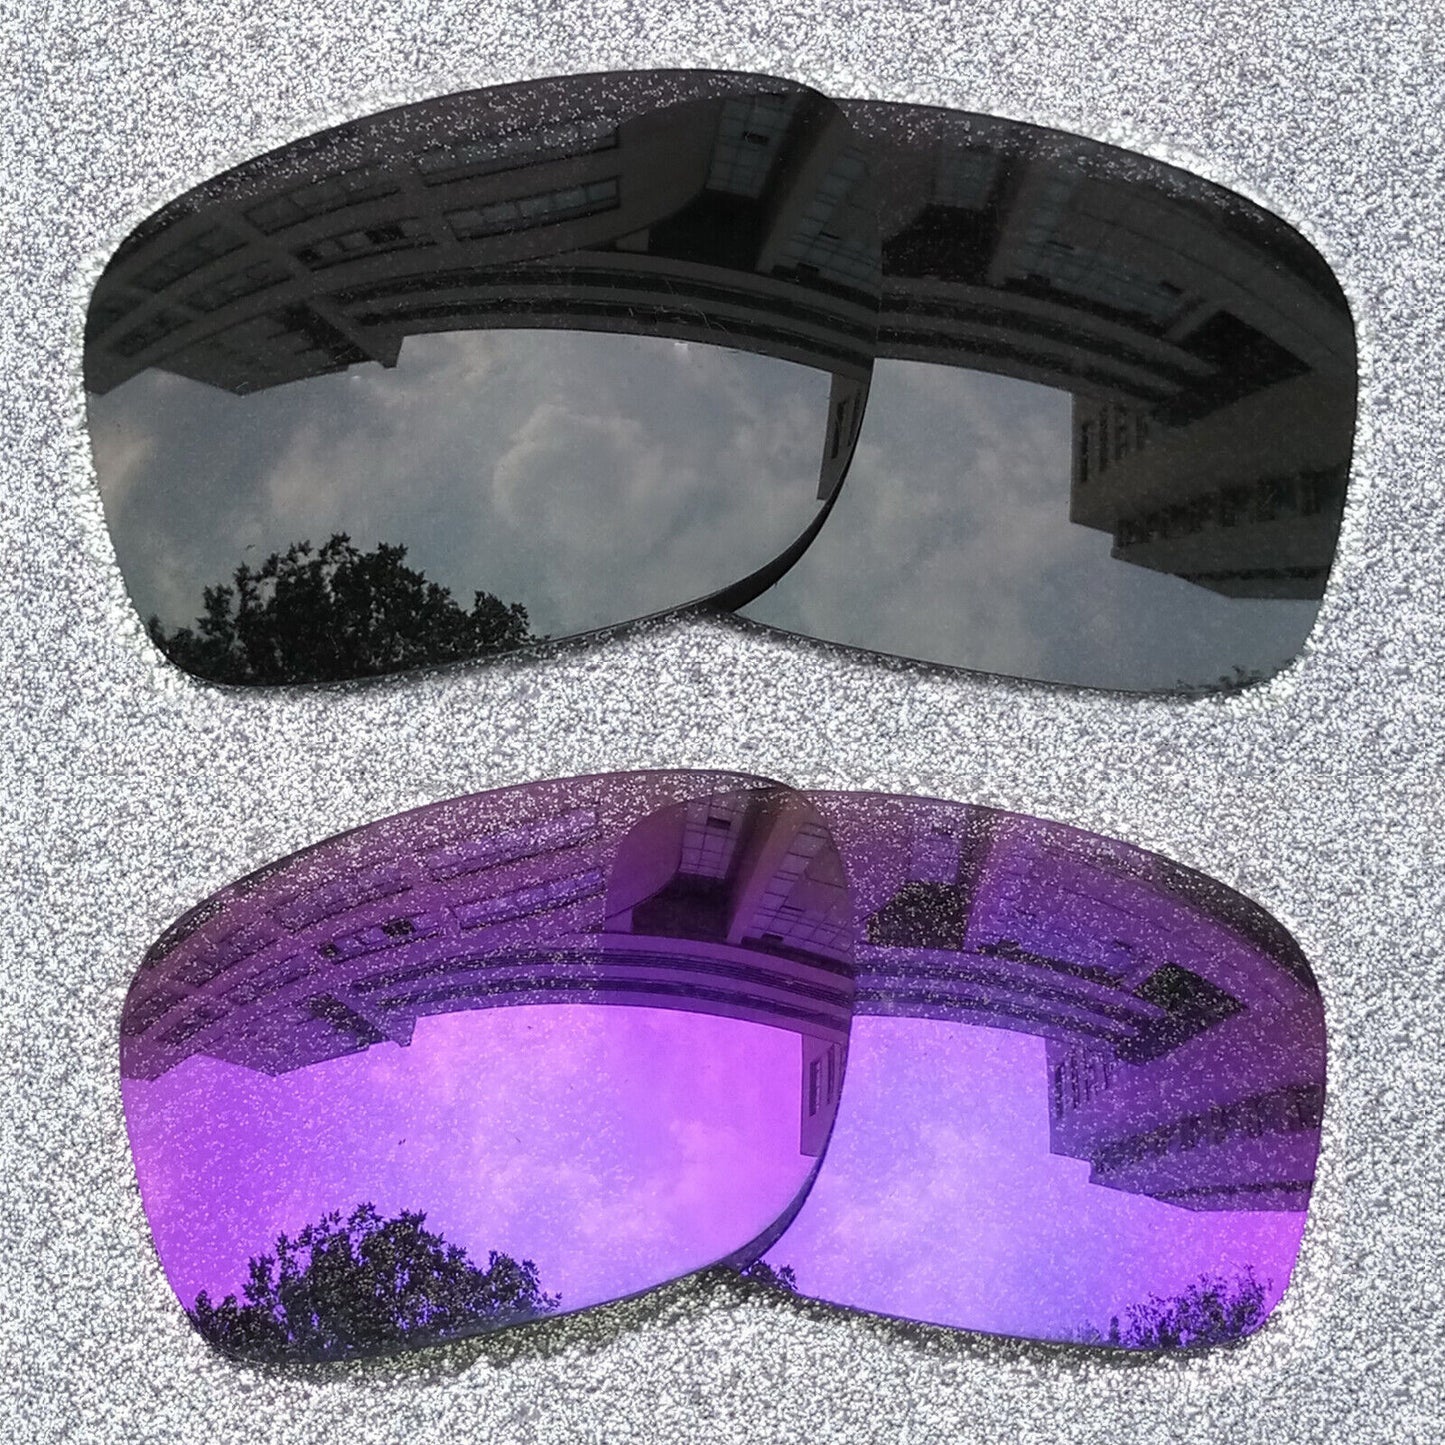 ExpressReplacement Polarized Lense For-Oakley Holbrook Metal Sunglass OO4123